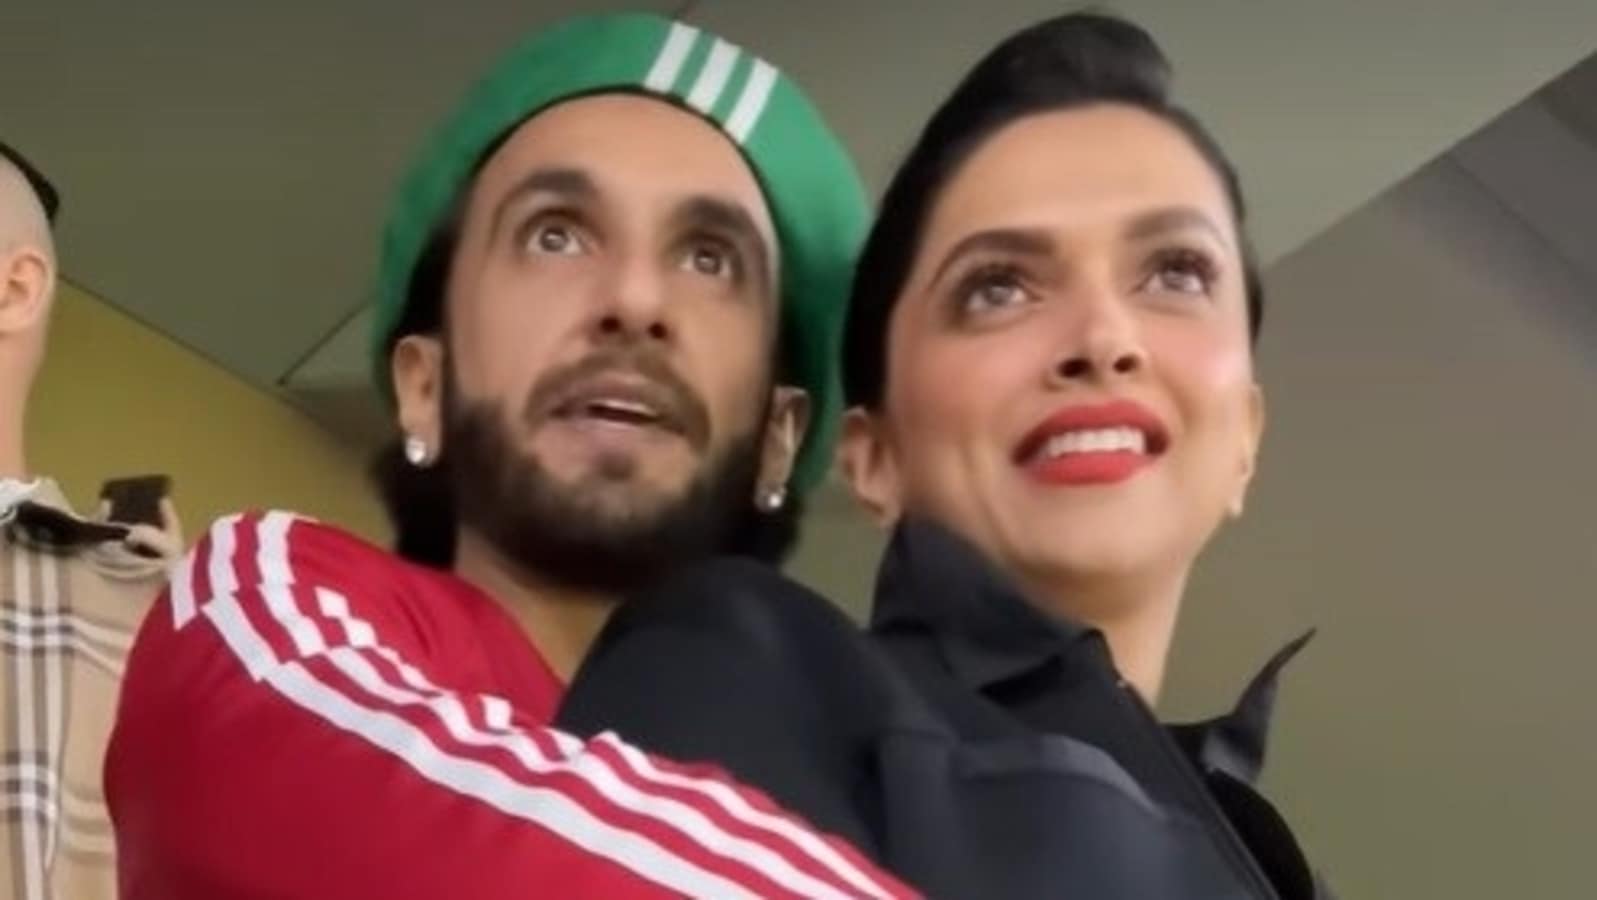 Watch: Deepika Padukone calls her FIFA World Cup outfit 'perfect